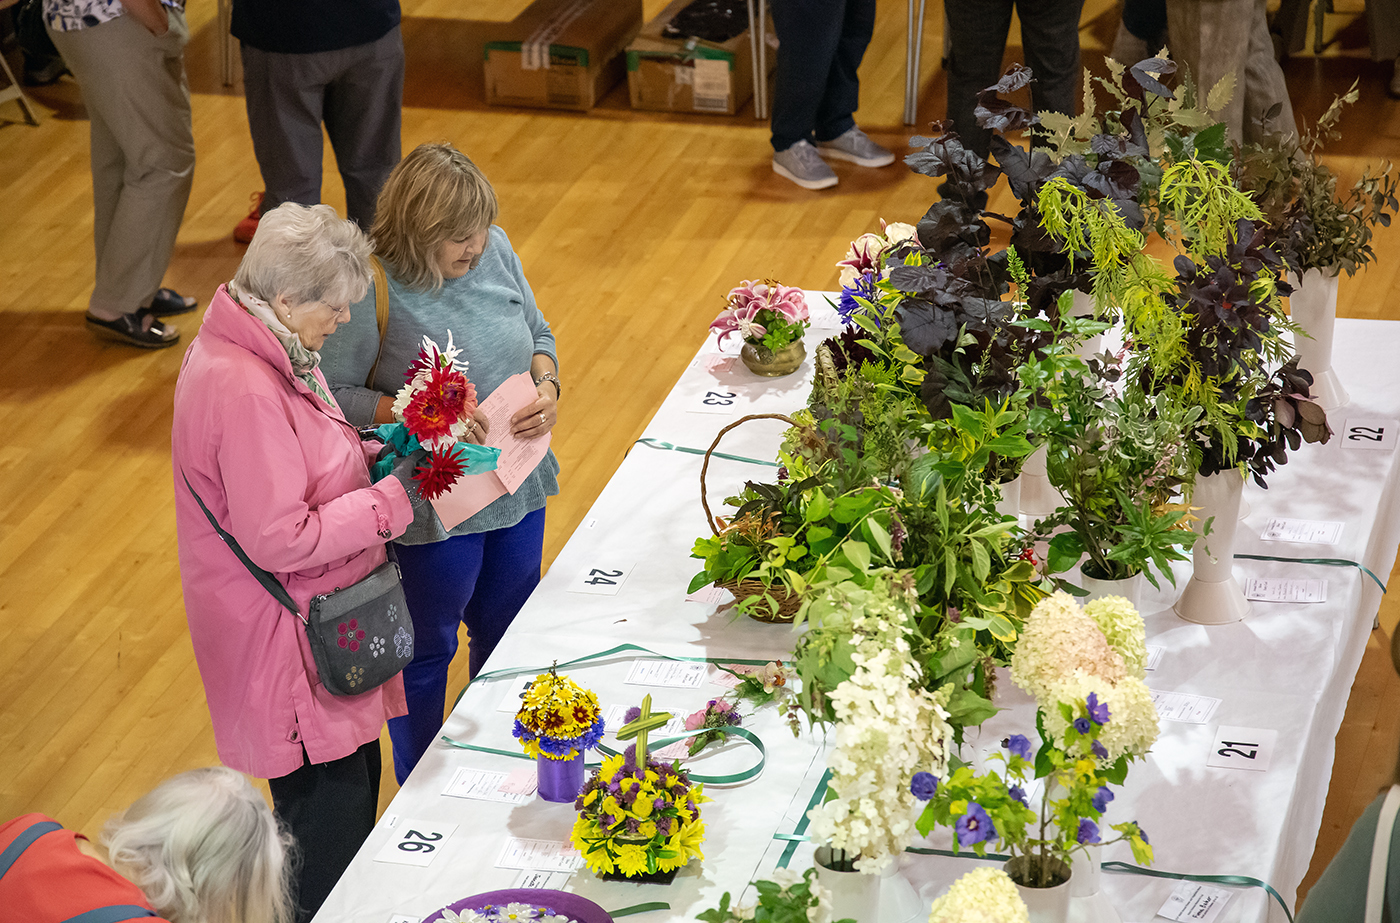 A riot of colour at the Victoria Halls as the fruits (and flowers, and vegetables) of months of hard work in the towns gardens and greenhouses was shown off to the public